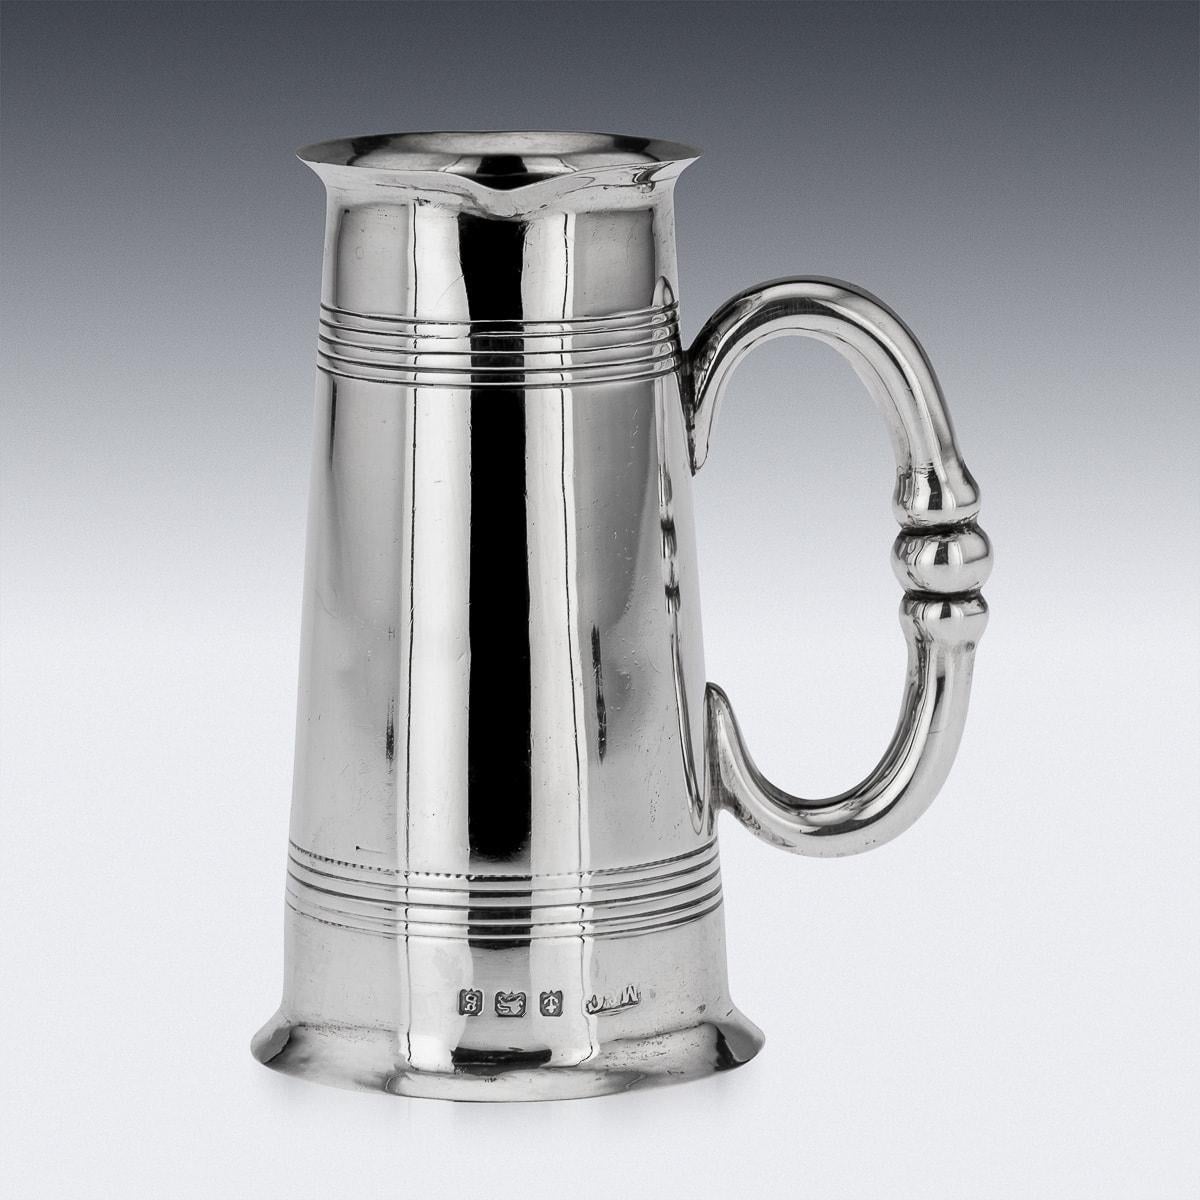 Antique early 20th Century Edwardian solid silver tankard of traditional form. The tankard consists of a flared upper rim and pouring spout, a C-shaped handle, the belly is decorated with reeded bands which are engraved and which terminates in a